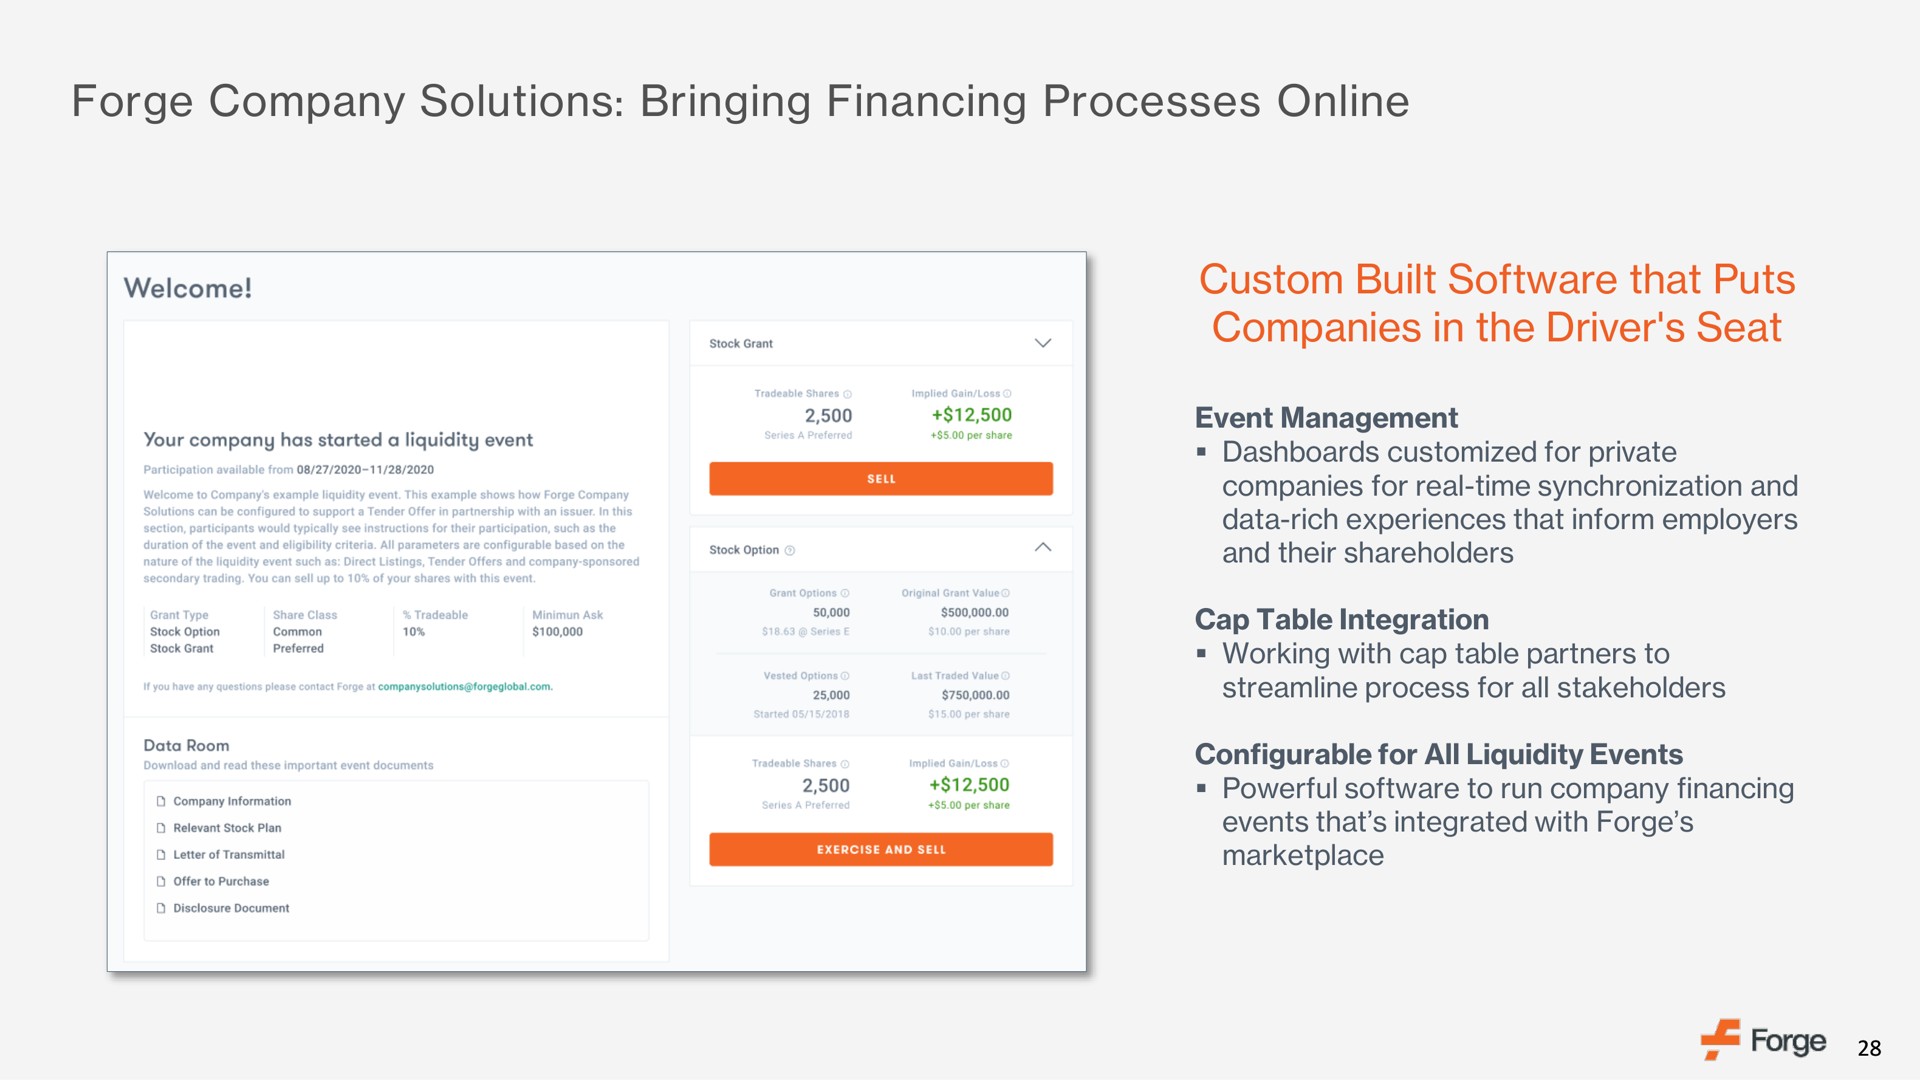 forge company solutions bringing financing processes custom built that puts companies in the driver seat of | Forge